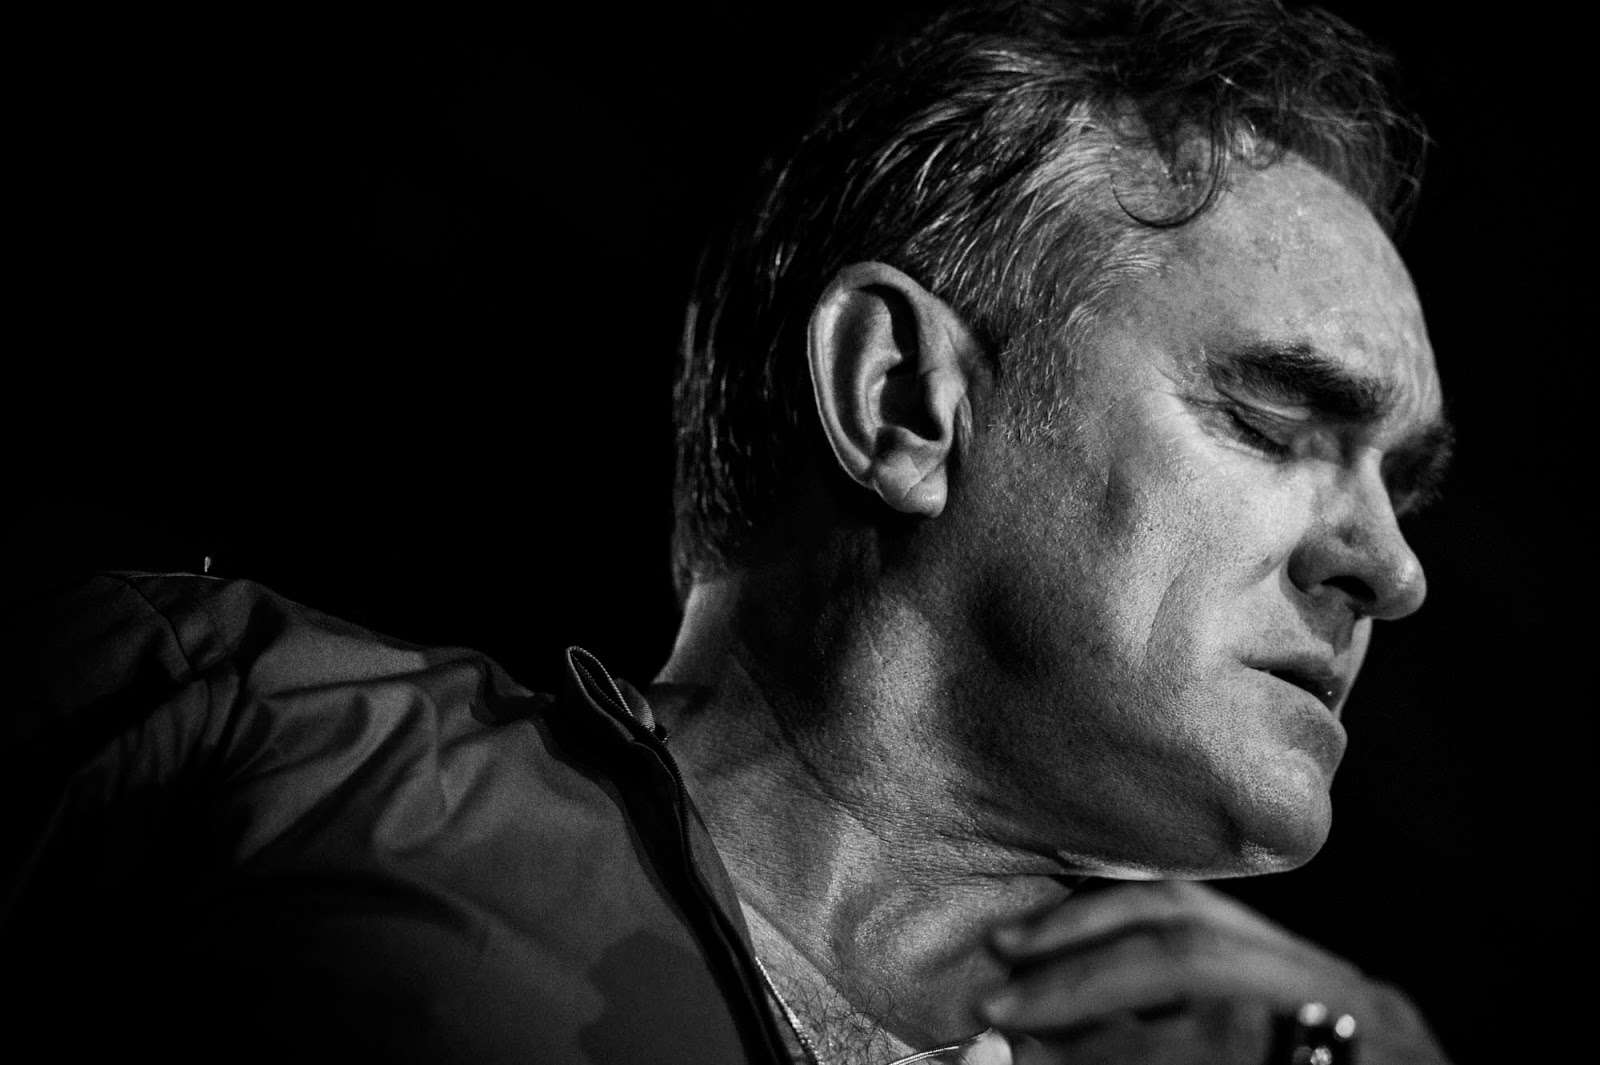 Singer Morrissey still has incendiary opinions on world matters, and the royal family and Donald Trump are in his sights.